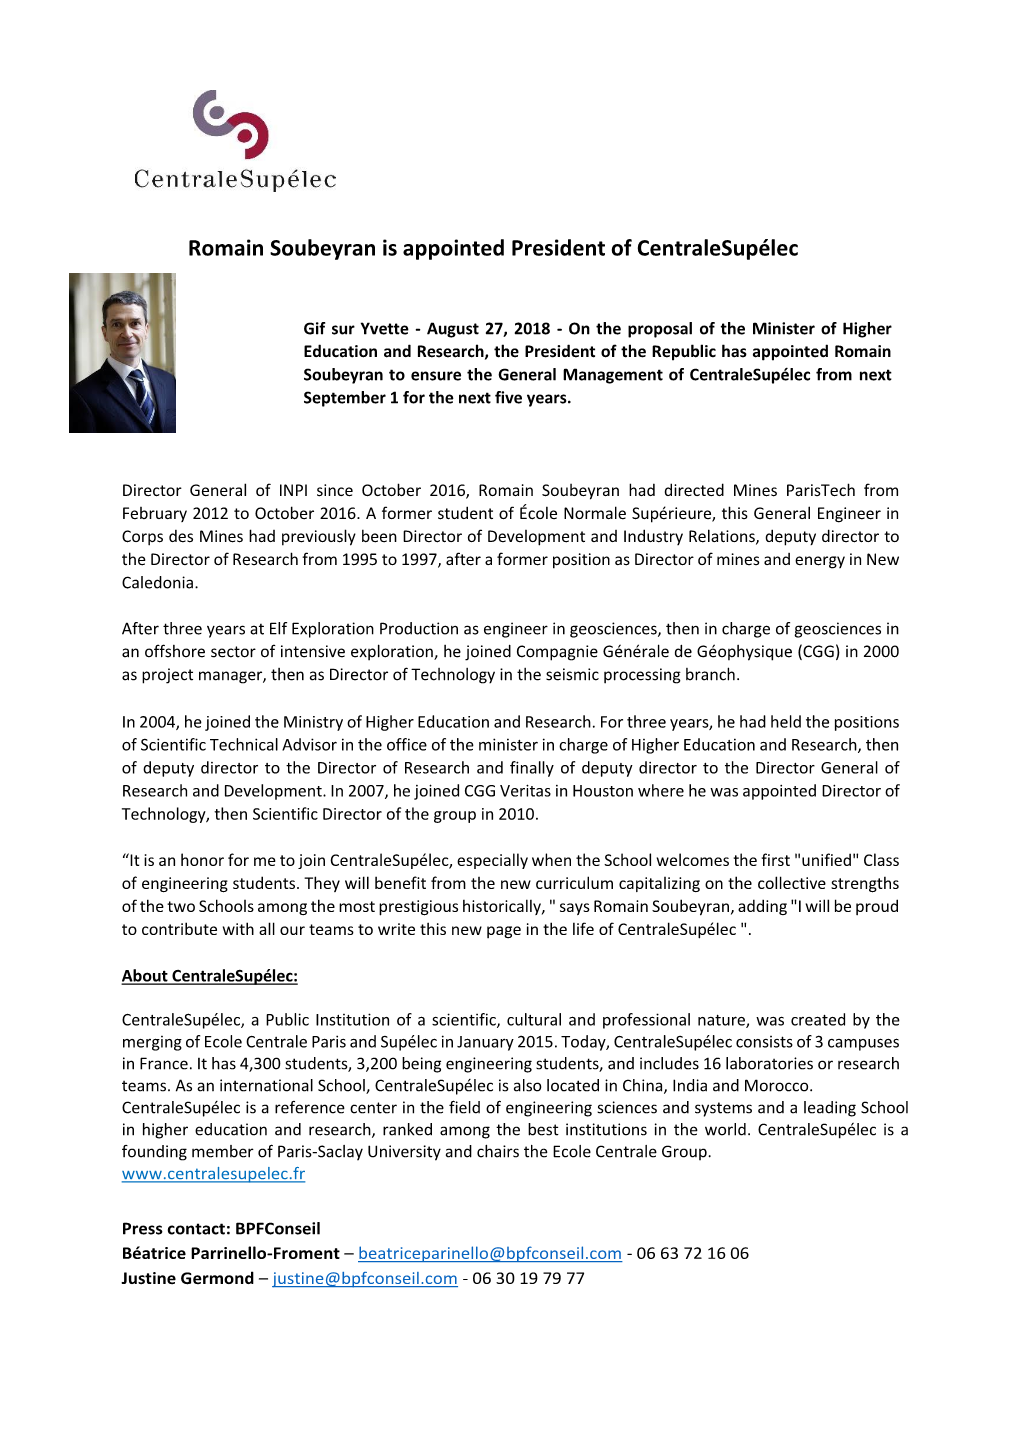 Romain Soubeyran Is Appointed President of Centralesupélec